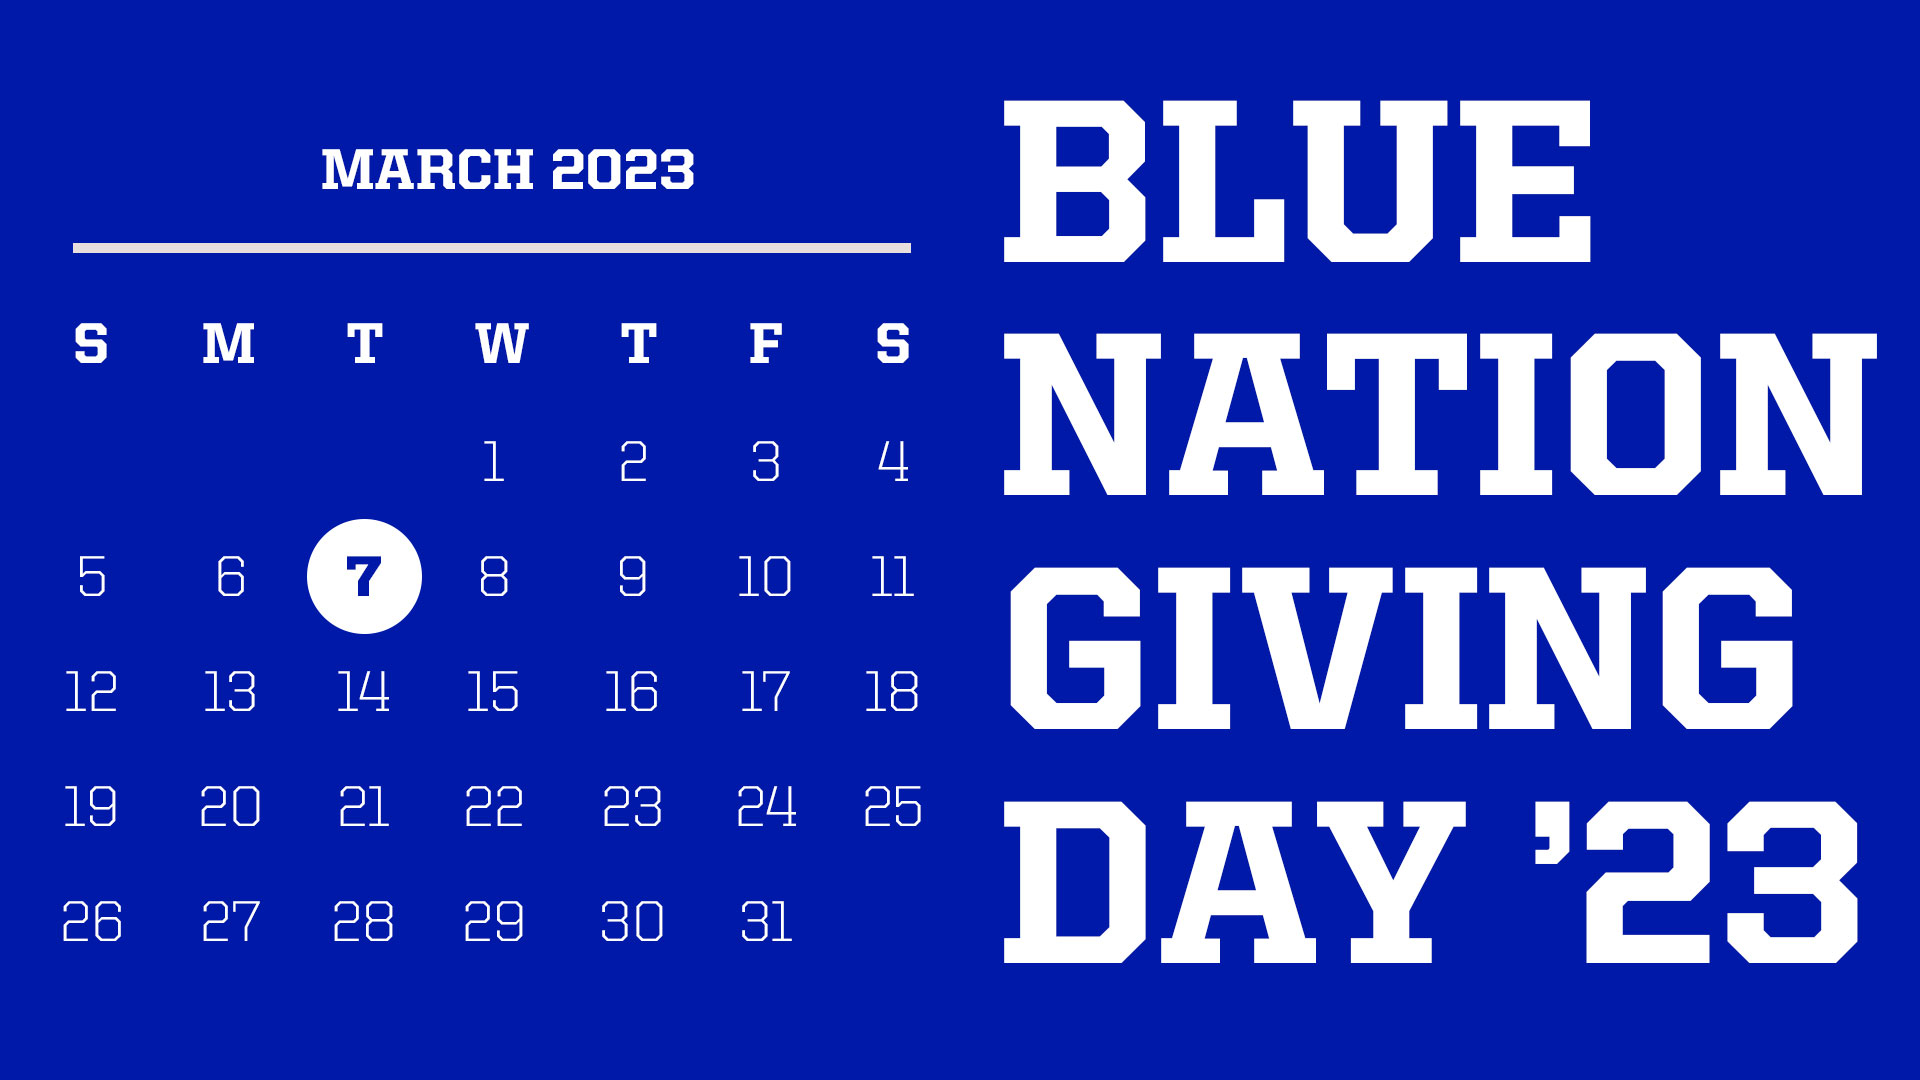 Save the Date: Blue Nation Giving Day is March 7th, 2023!